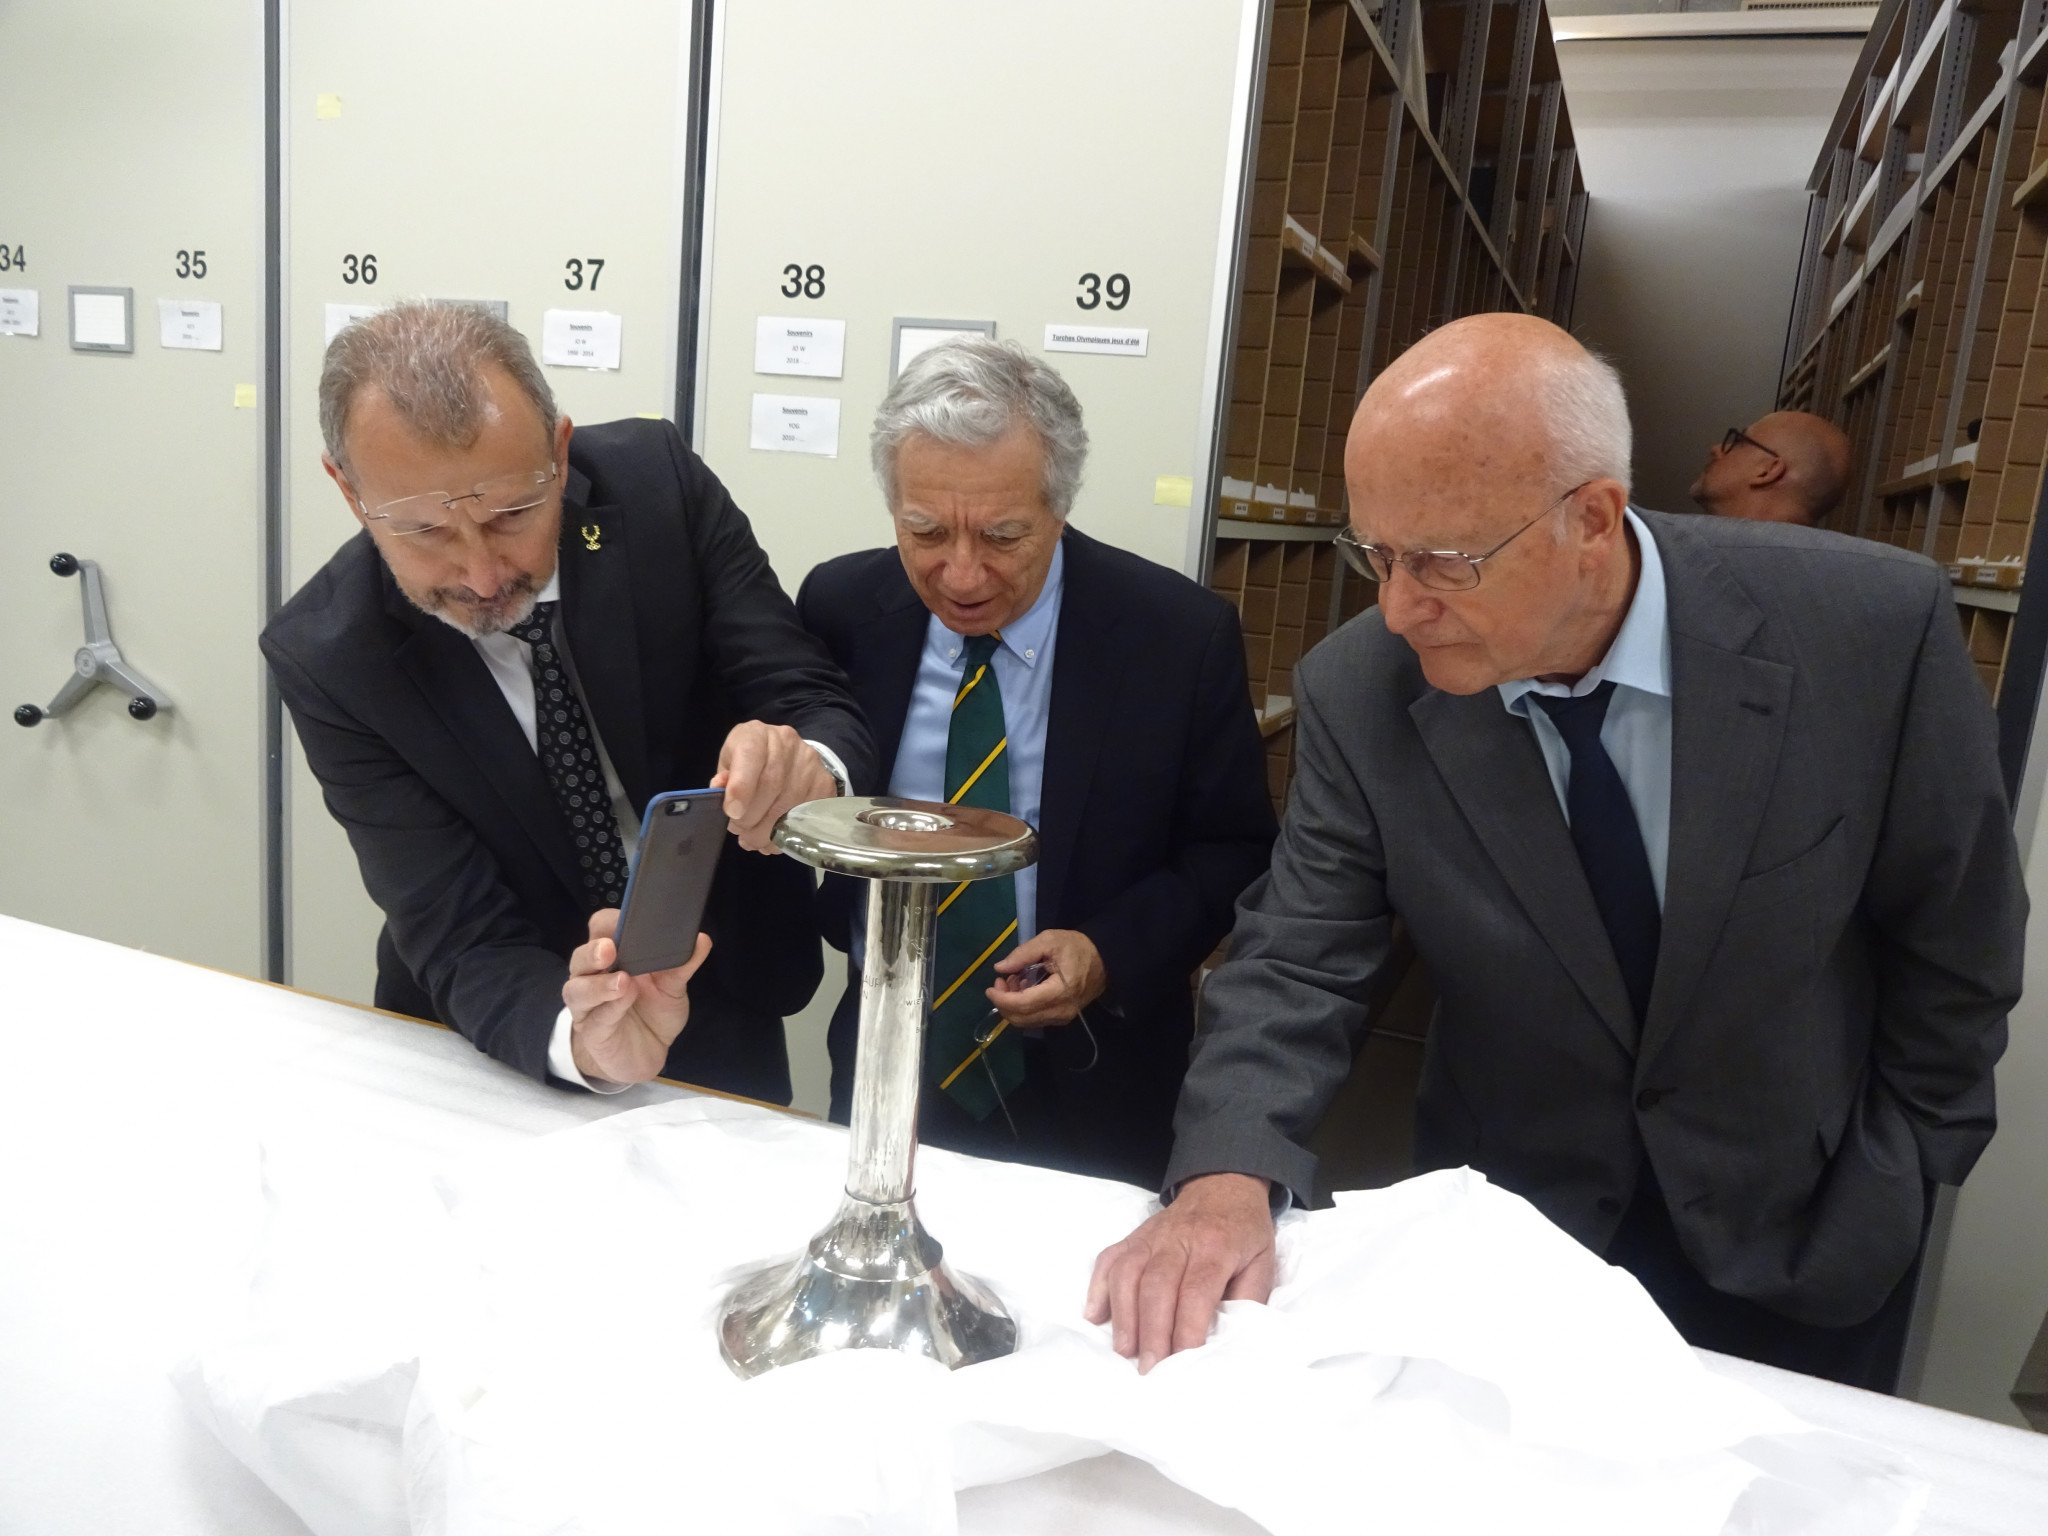 Olympic historians Kostas Georgiadis, David Wallechinsky and Volker Kluge examine an original Olympic Torch in the vaults of the Olympic Museum ©ITG